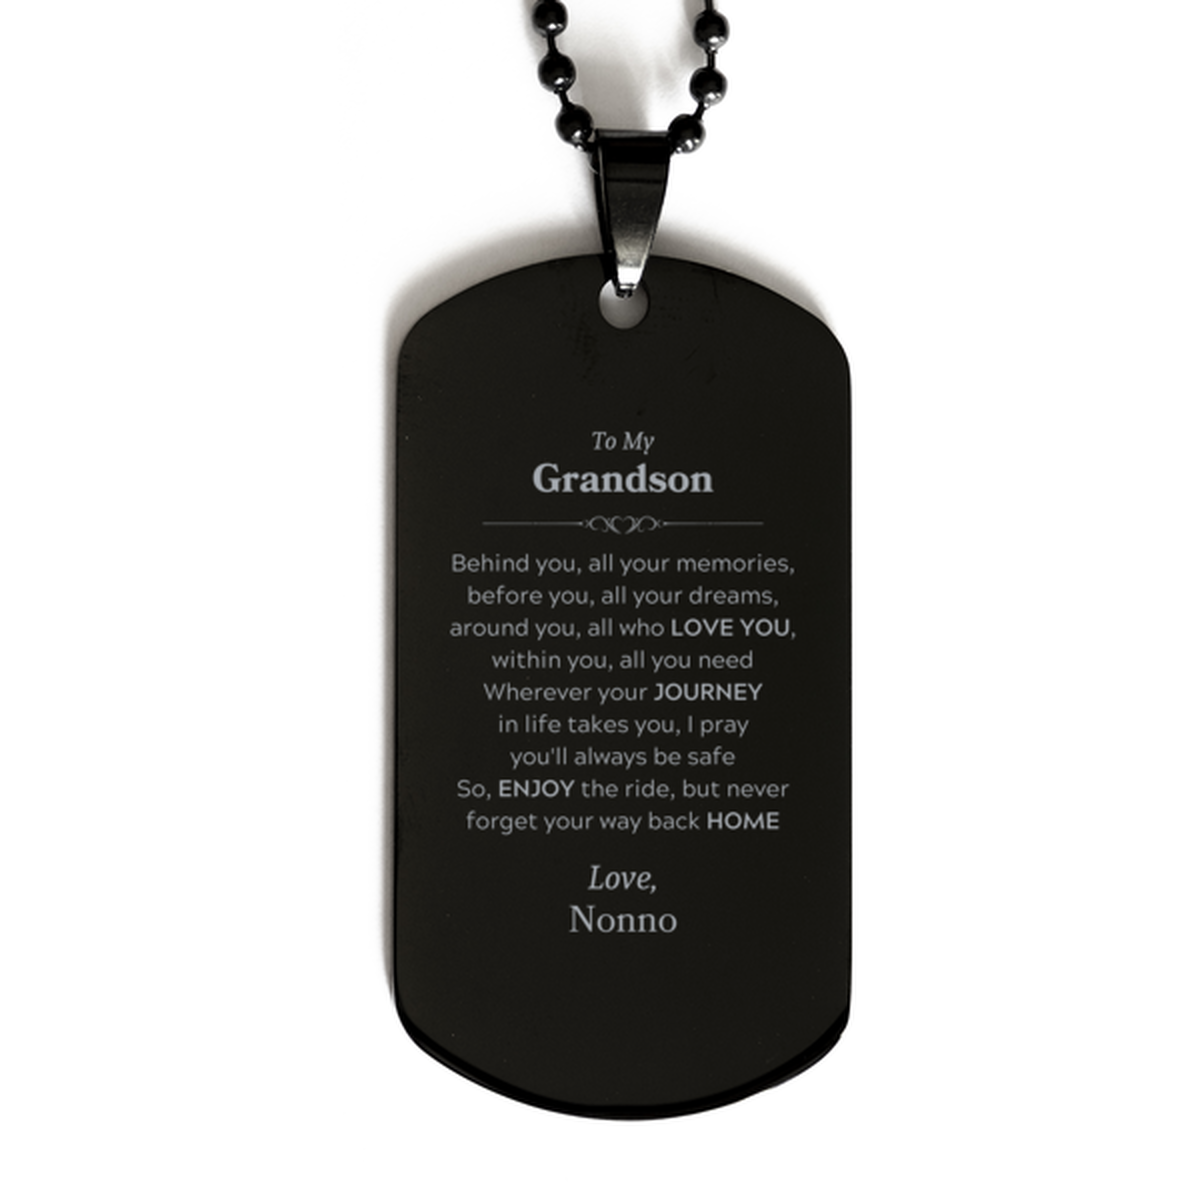 To My Grandson Graduation Gifts from Nonno, Grandson Black Dog Tag Christmas Birthday Gifts for Grandson Behind you, all your memories, before you, all your dreams. Love, Nonno